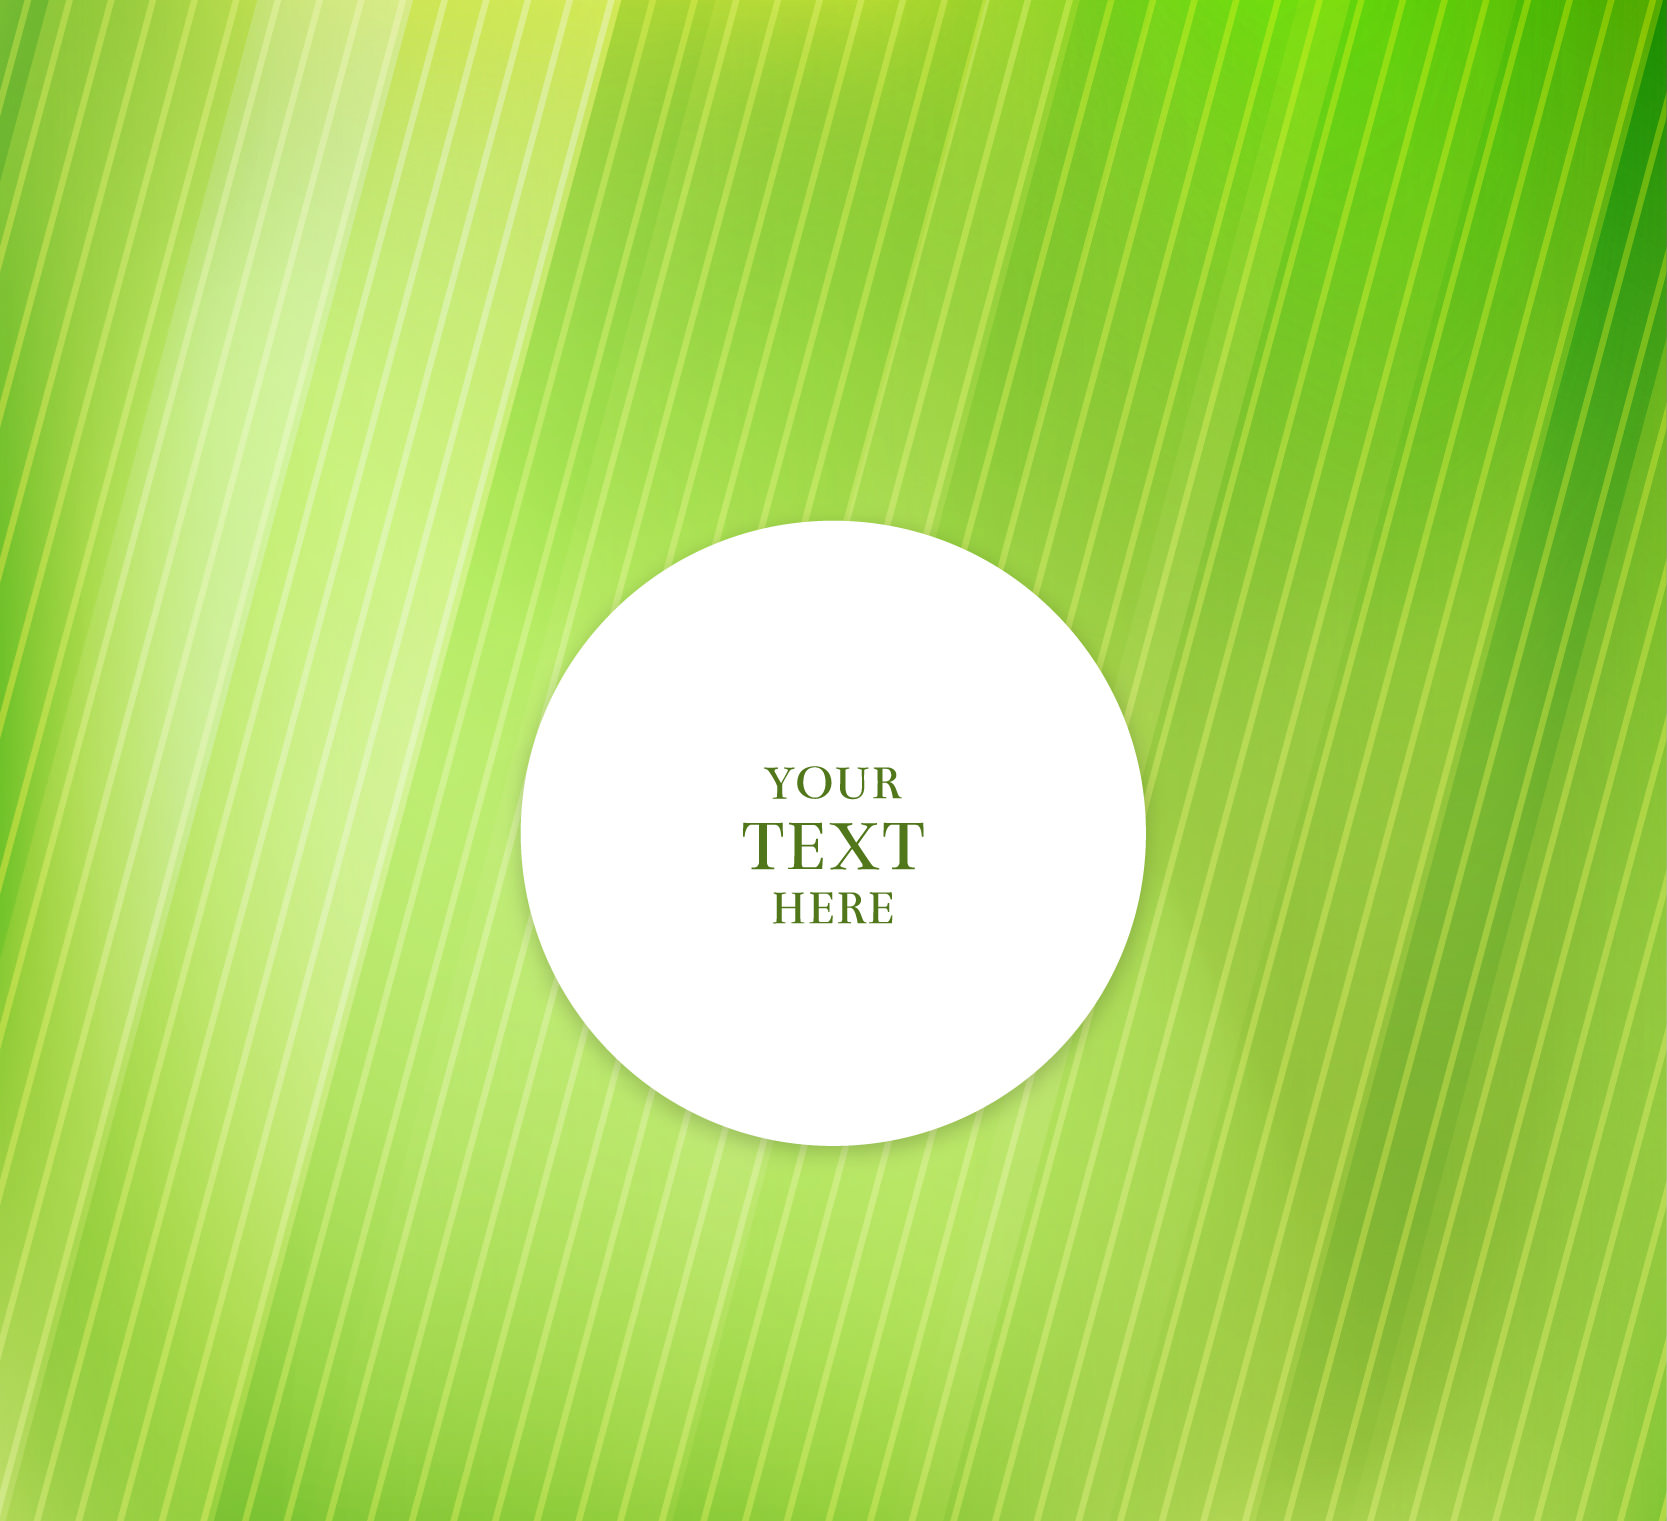 White Label Over Green Background